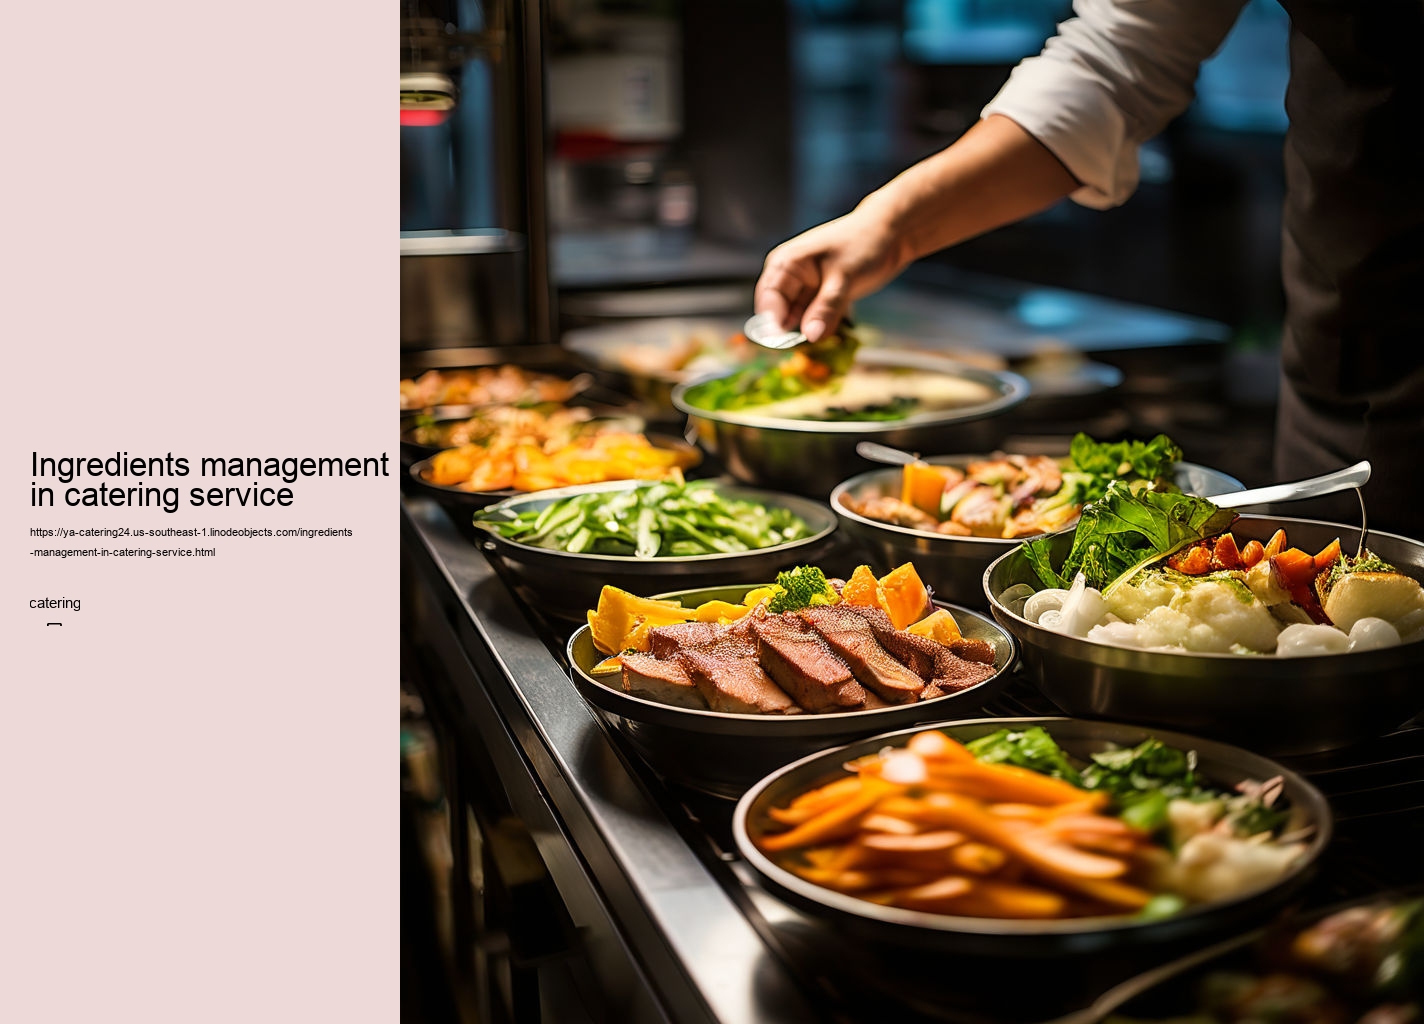 Ingredients management in catering service